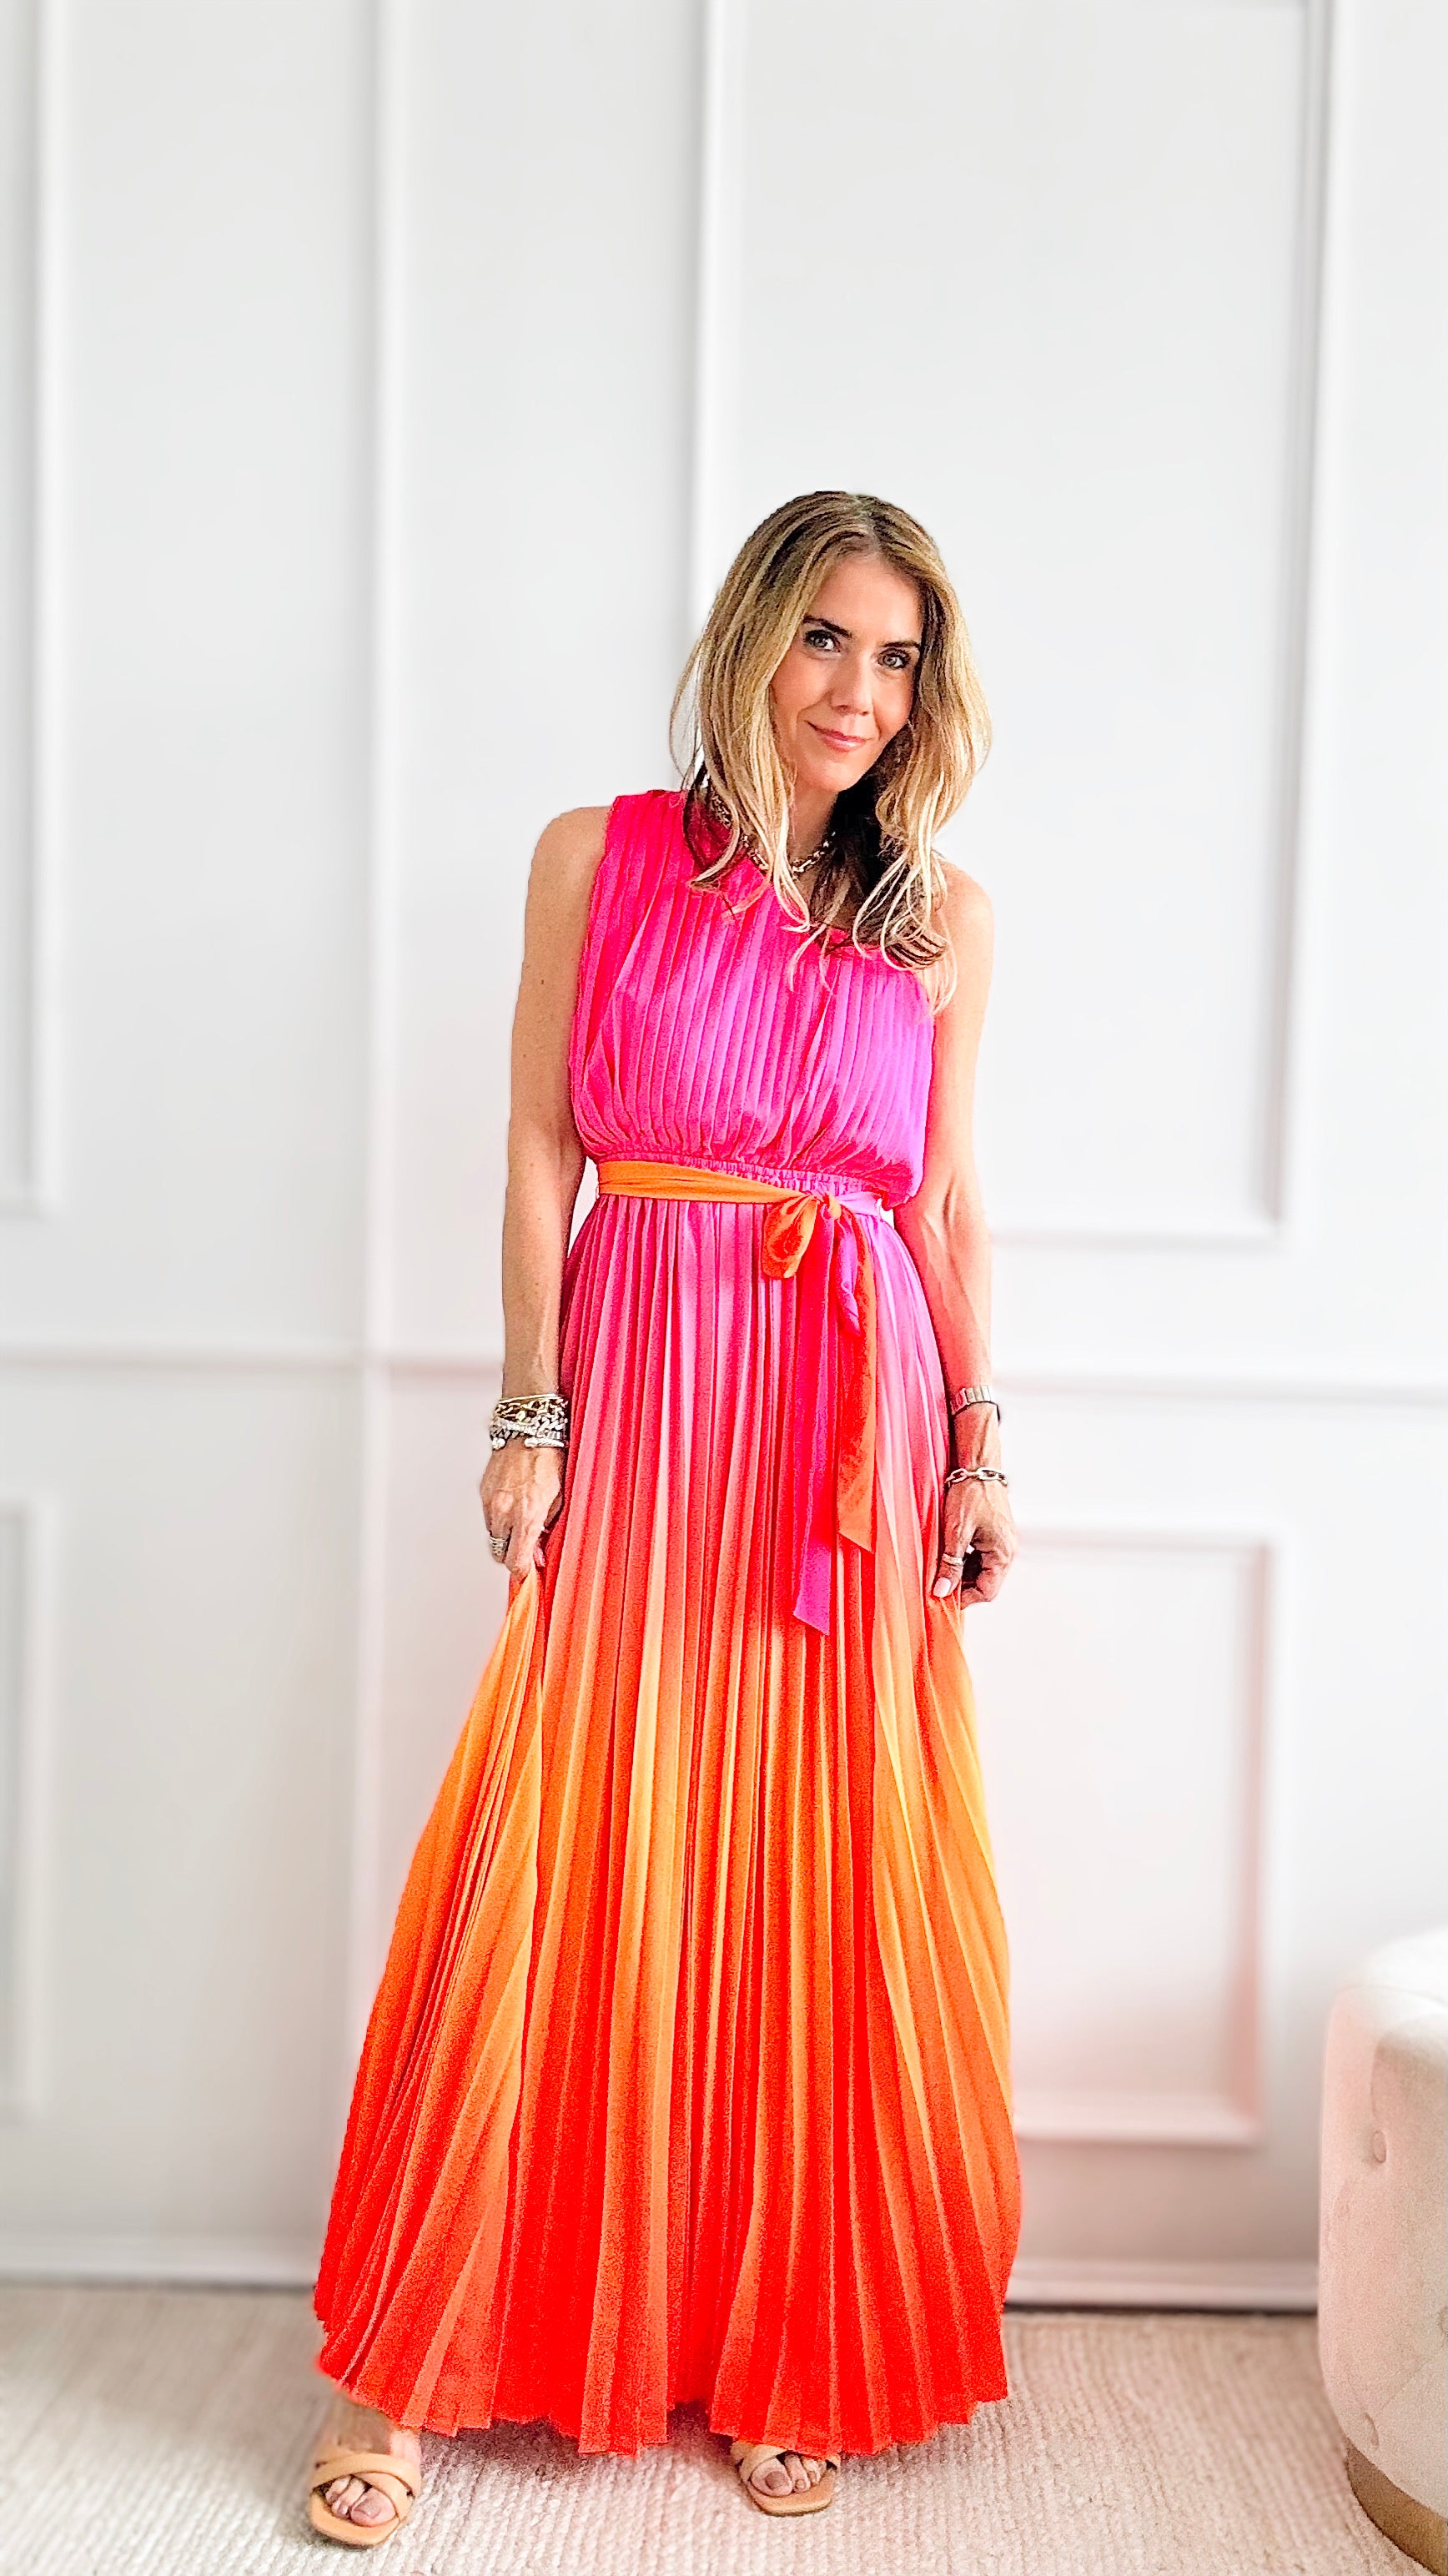 One Shoulder Faded Print Maxi Dress-Pink Orange-200 dresses/jumpsuits/rompers-Flying Tomato-Coastal Bloom Boutique, find the trendiest versions of the popular styles and looks Located in Indialantic, FL